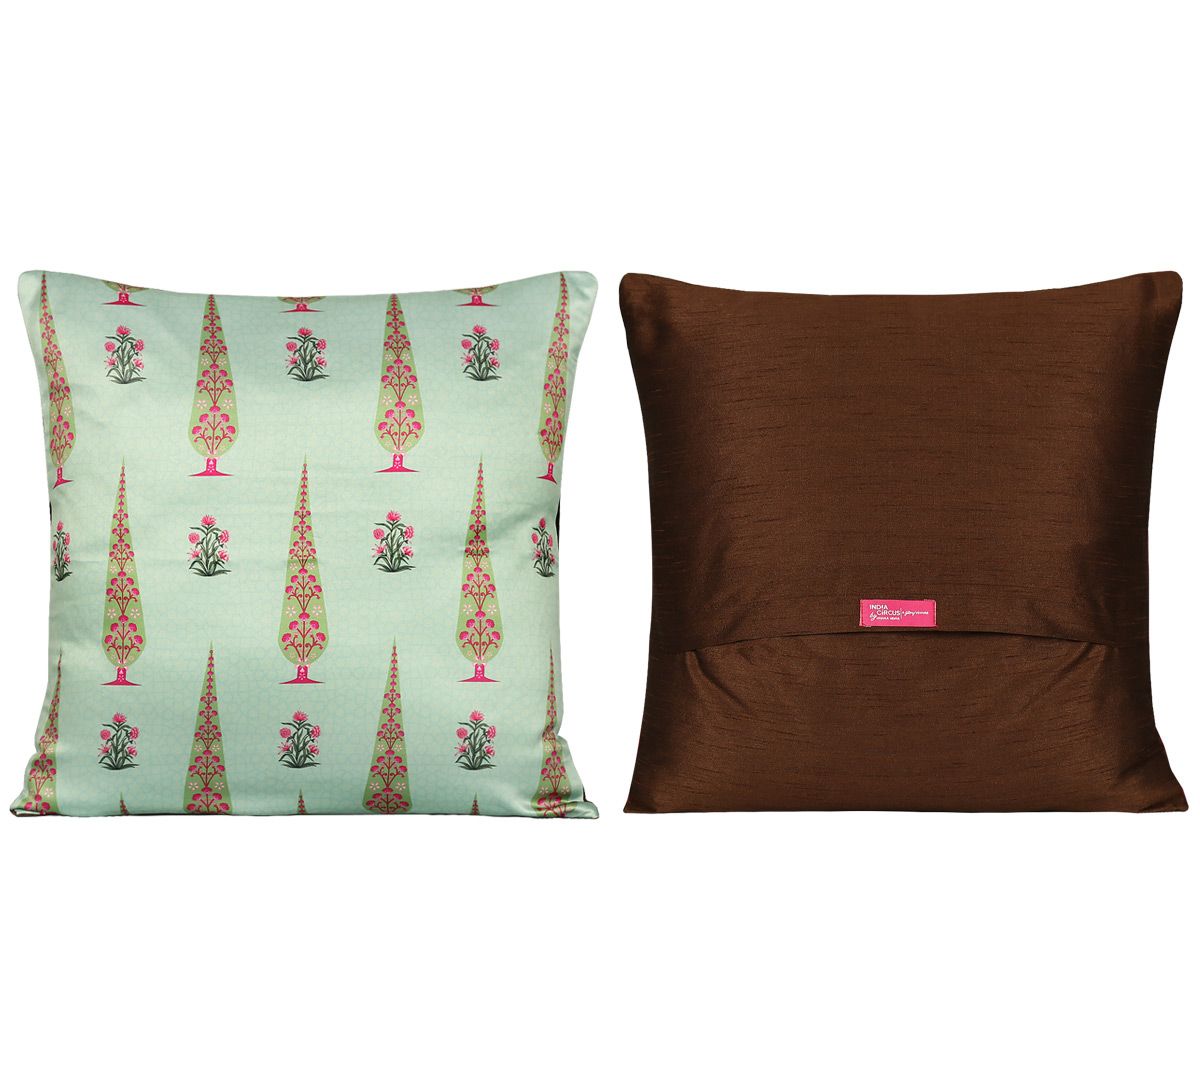 Peacock & Conifer Cushion Cover Set of 5